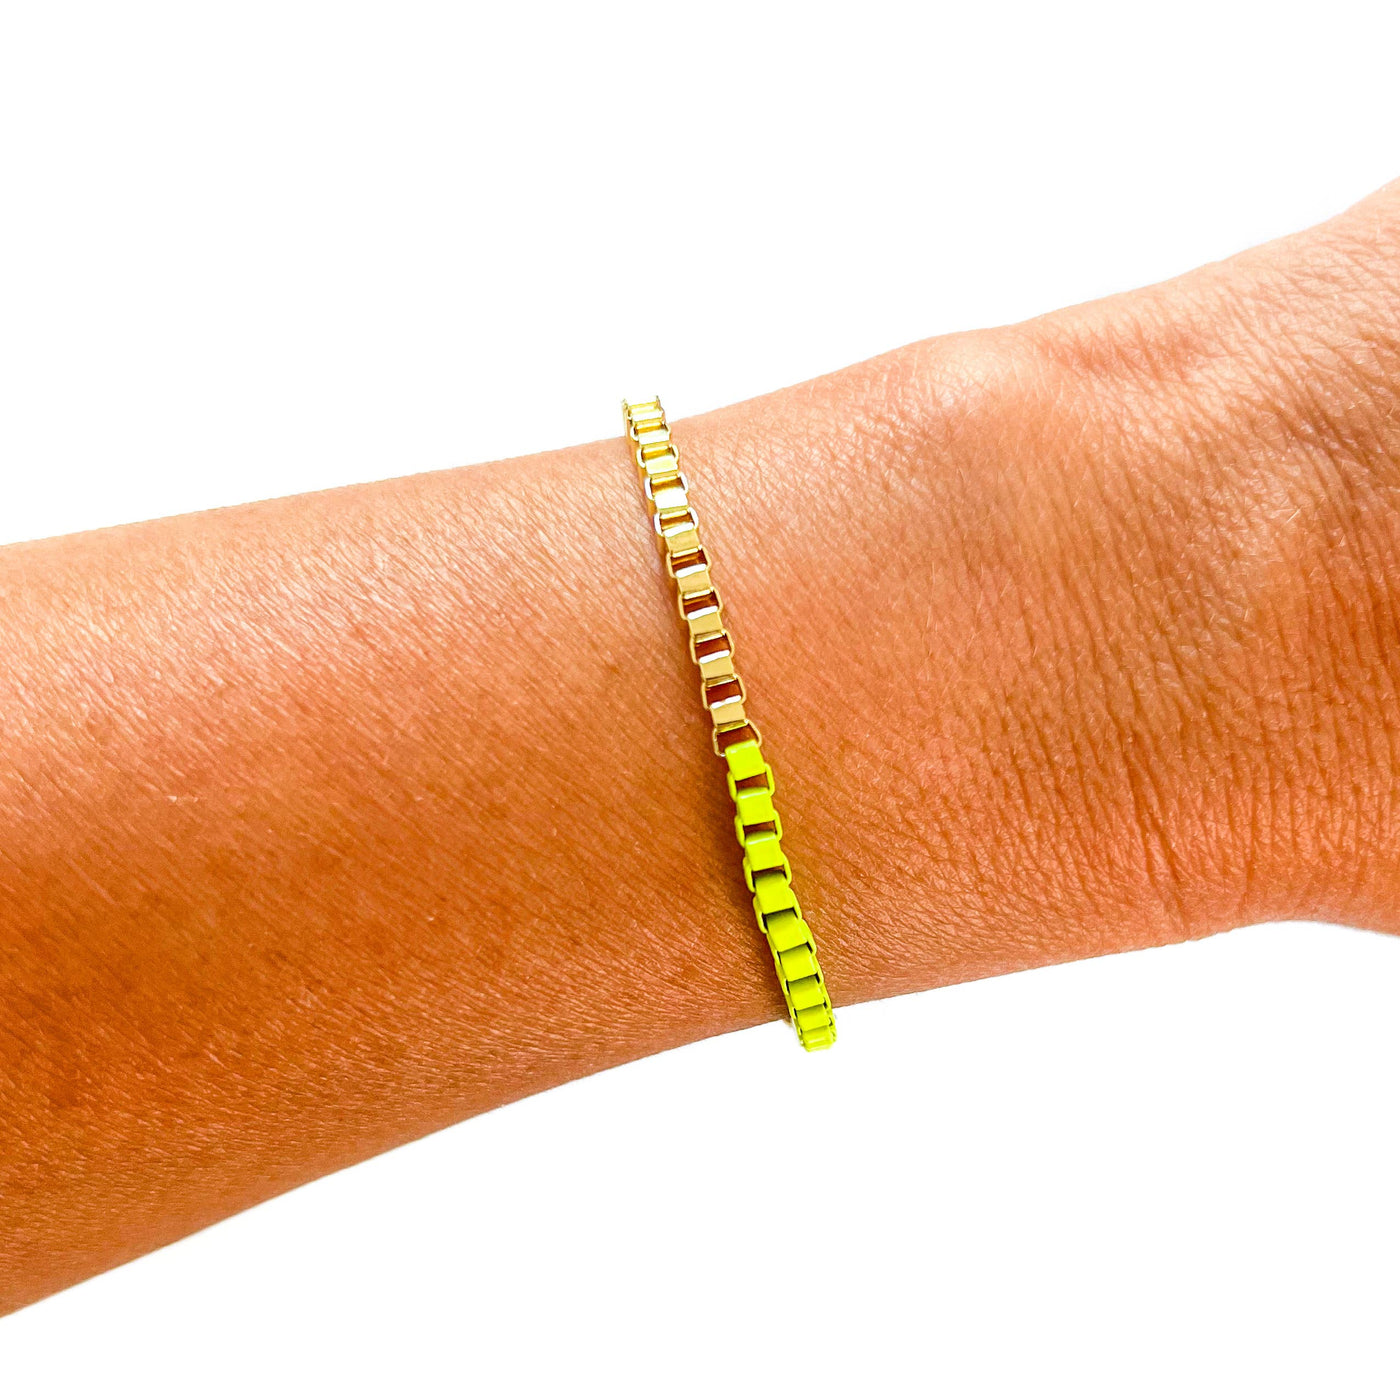 Chain link bracelet - 18K Gold and Neon Yellow